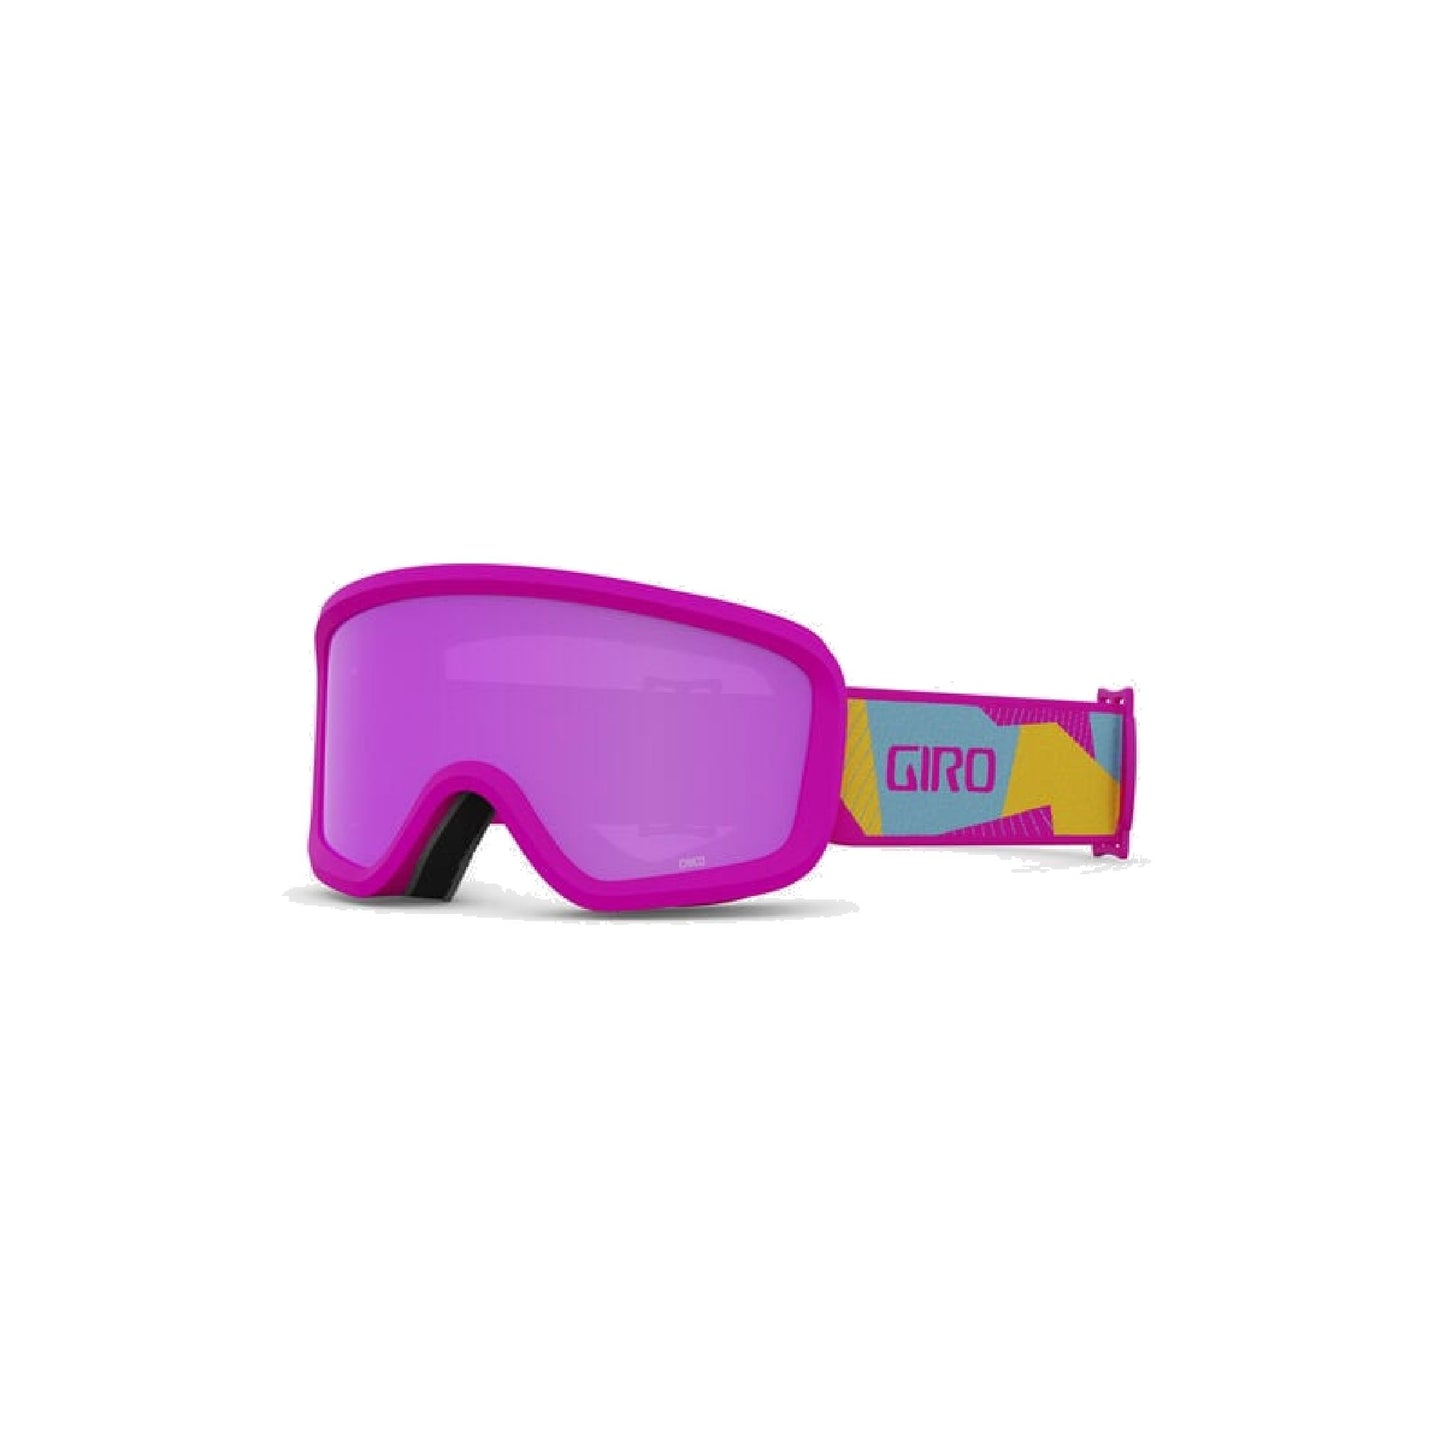 Giro Youth Chico 2.0 Snow Goggles Pink Geo Camo Amber Pink Snow Goggles